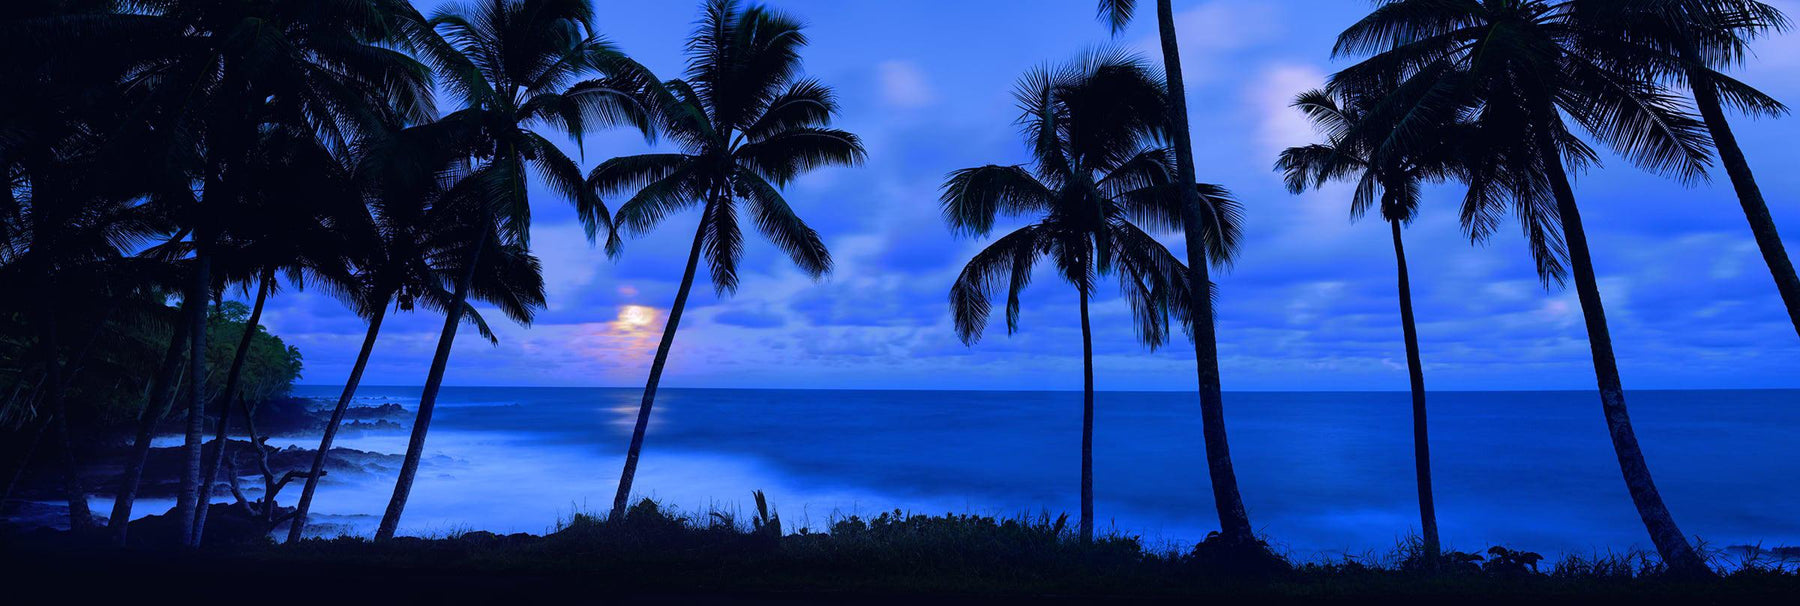 Palm tree silhouettes on a beach in Kapoho Hawaii with the moon glowing through the clouds in the distance